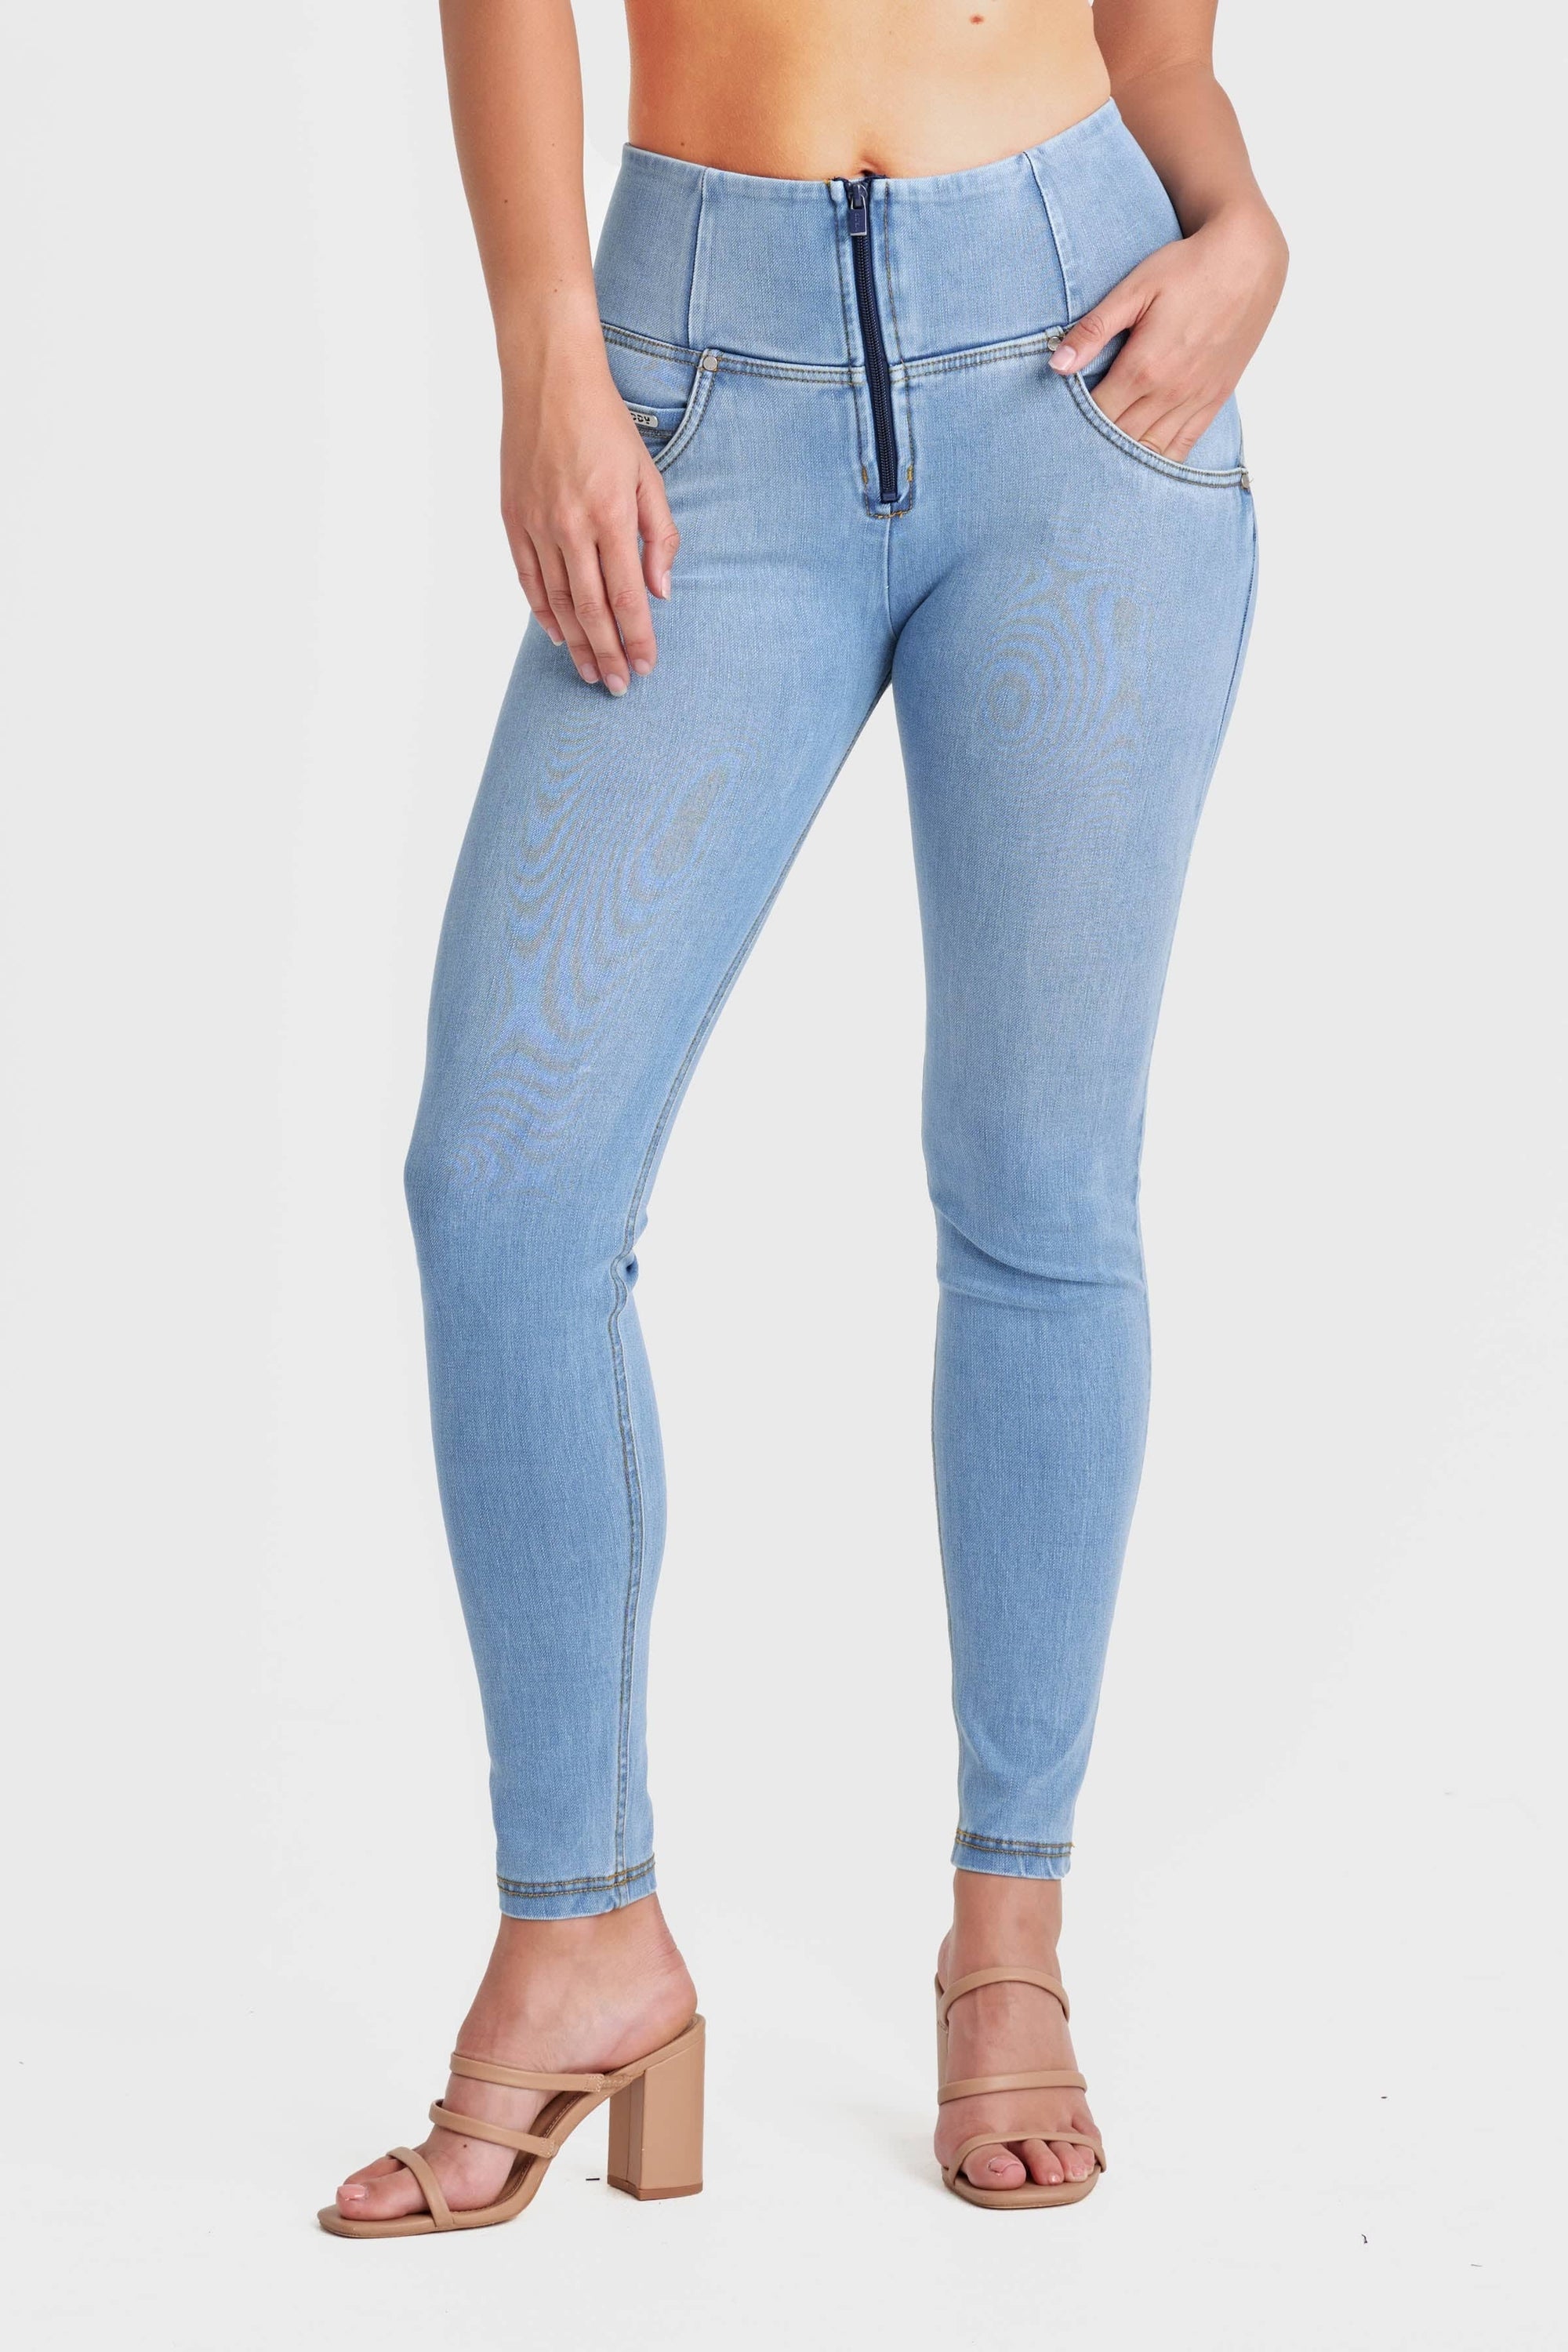 WR.UP® Snug Jeans - High Waisted - Full Length - Light Blue + Yellow Stitching 5